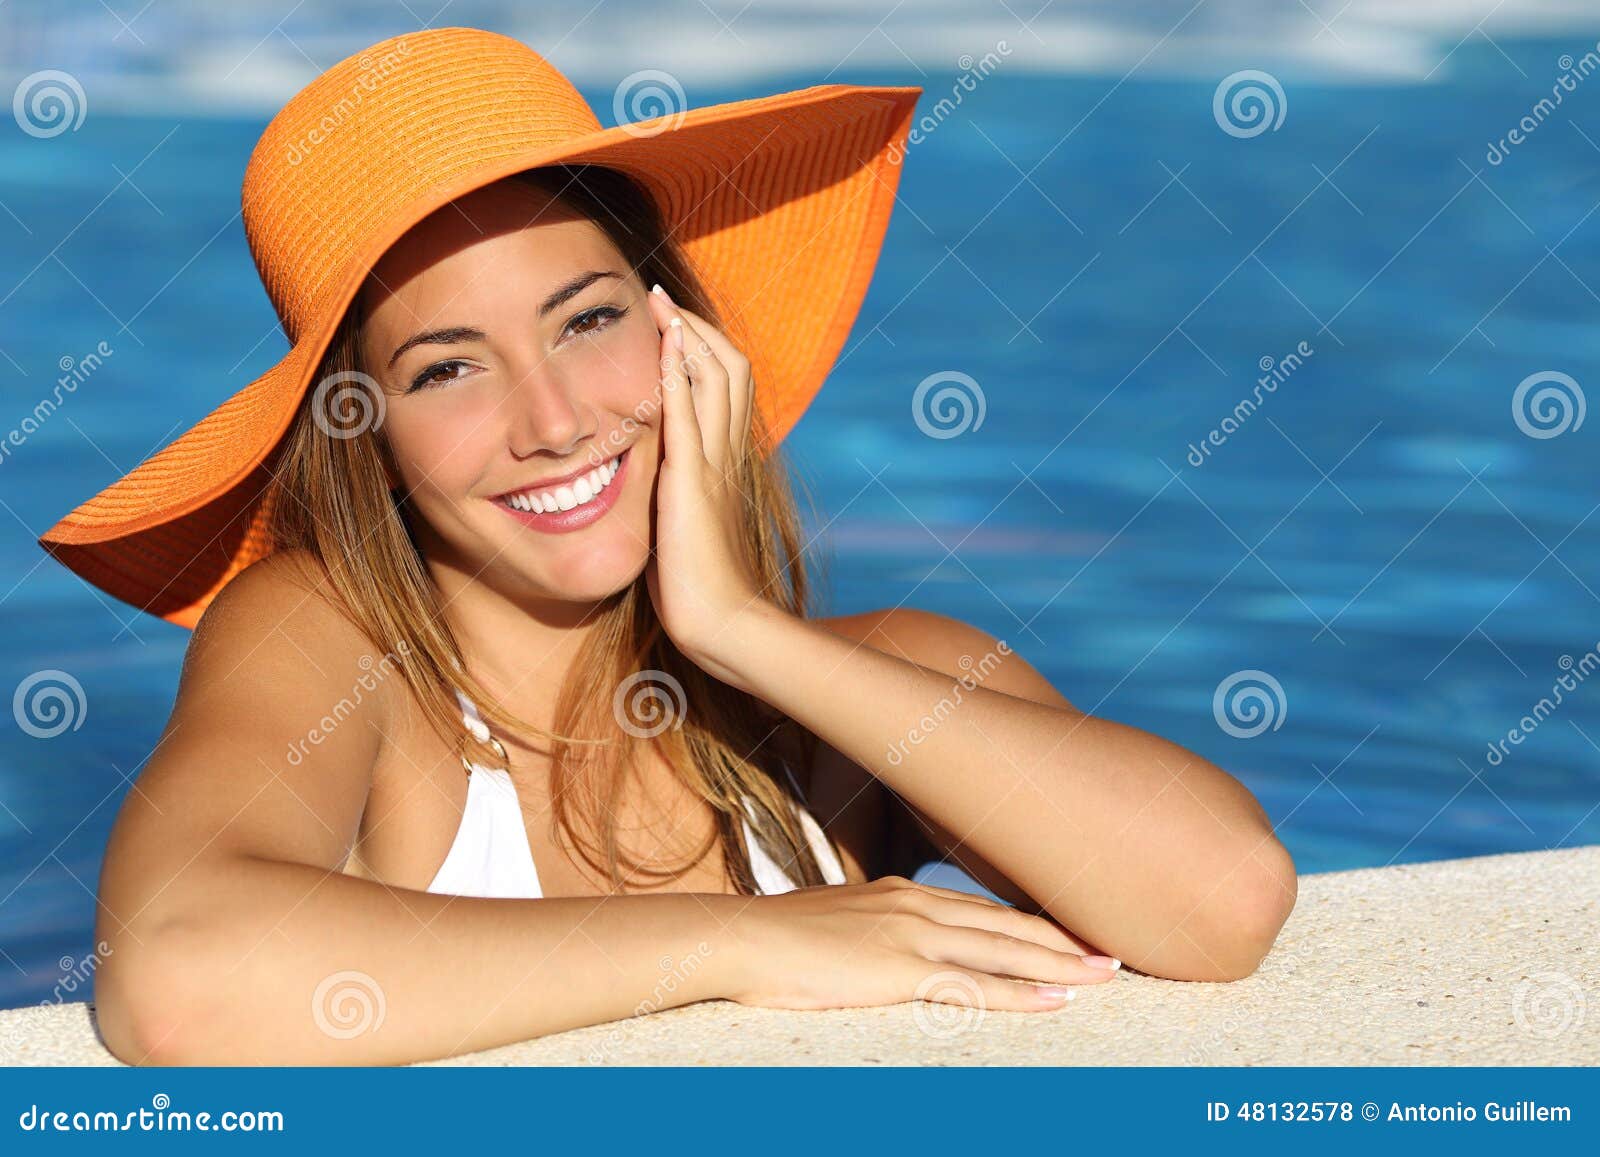 girl on holidays with a perfect white smile